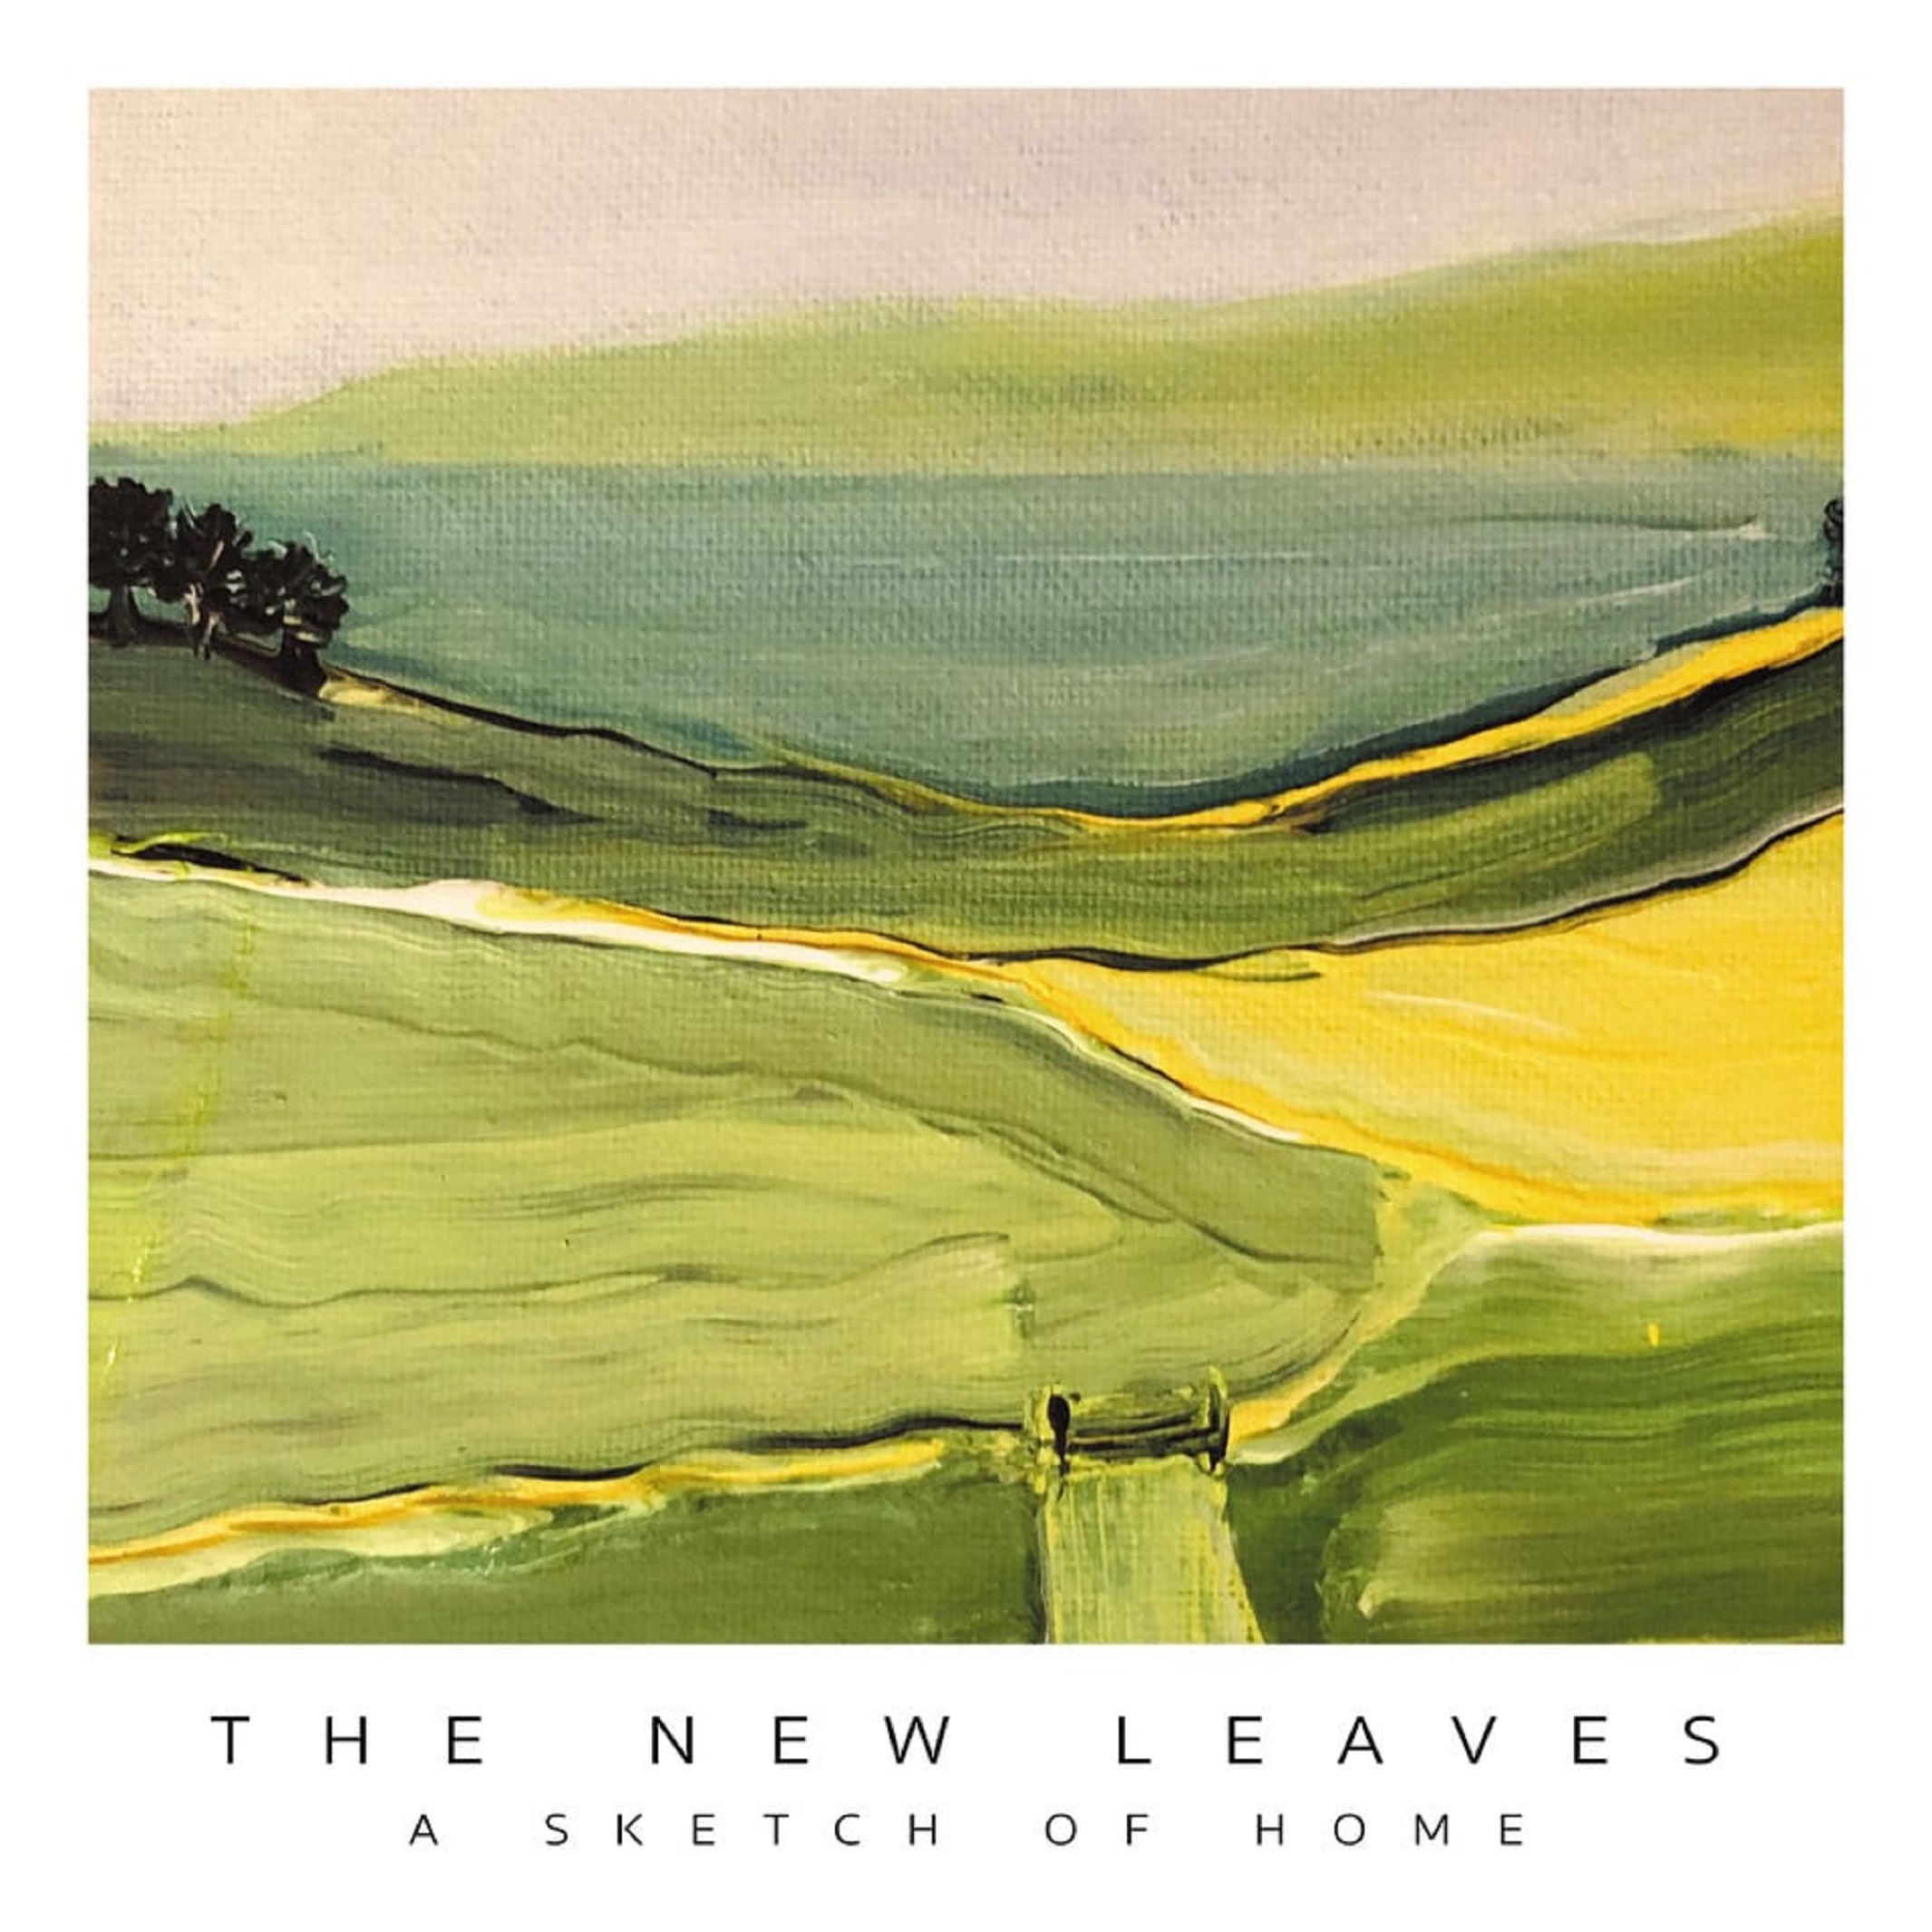 Mesmerising Folk Combo The New Leaves Present Their Debut Album, "A Sketch of Home"